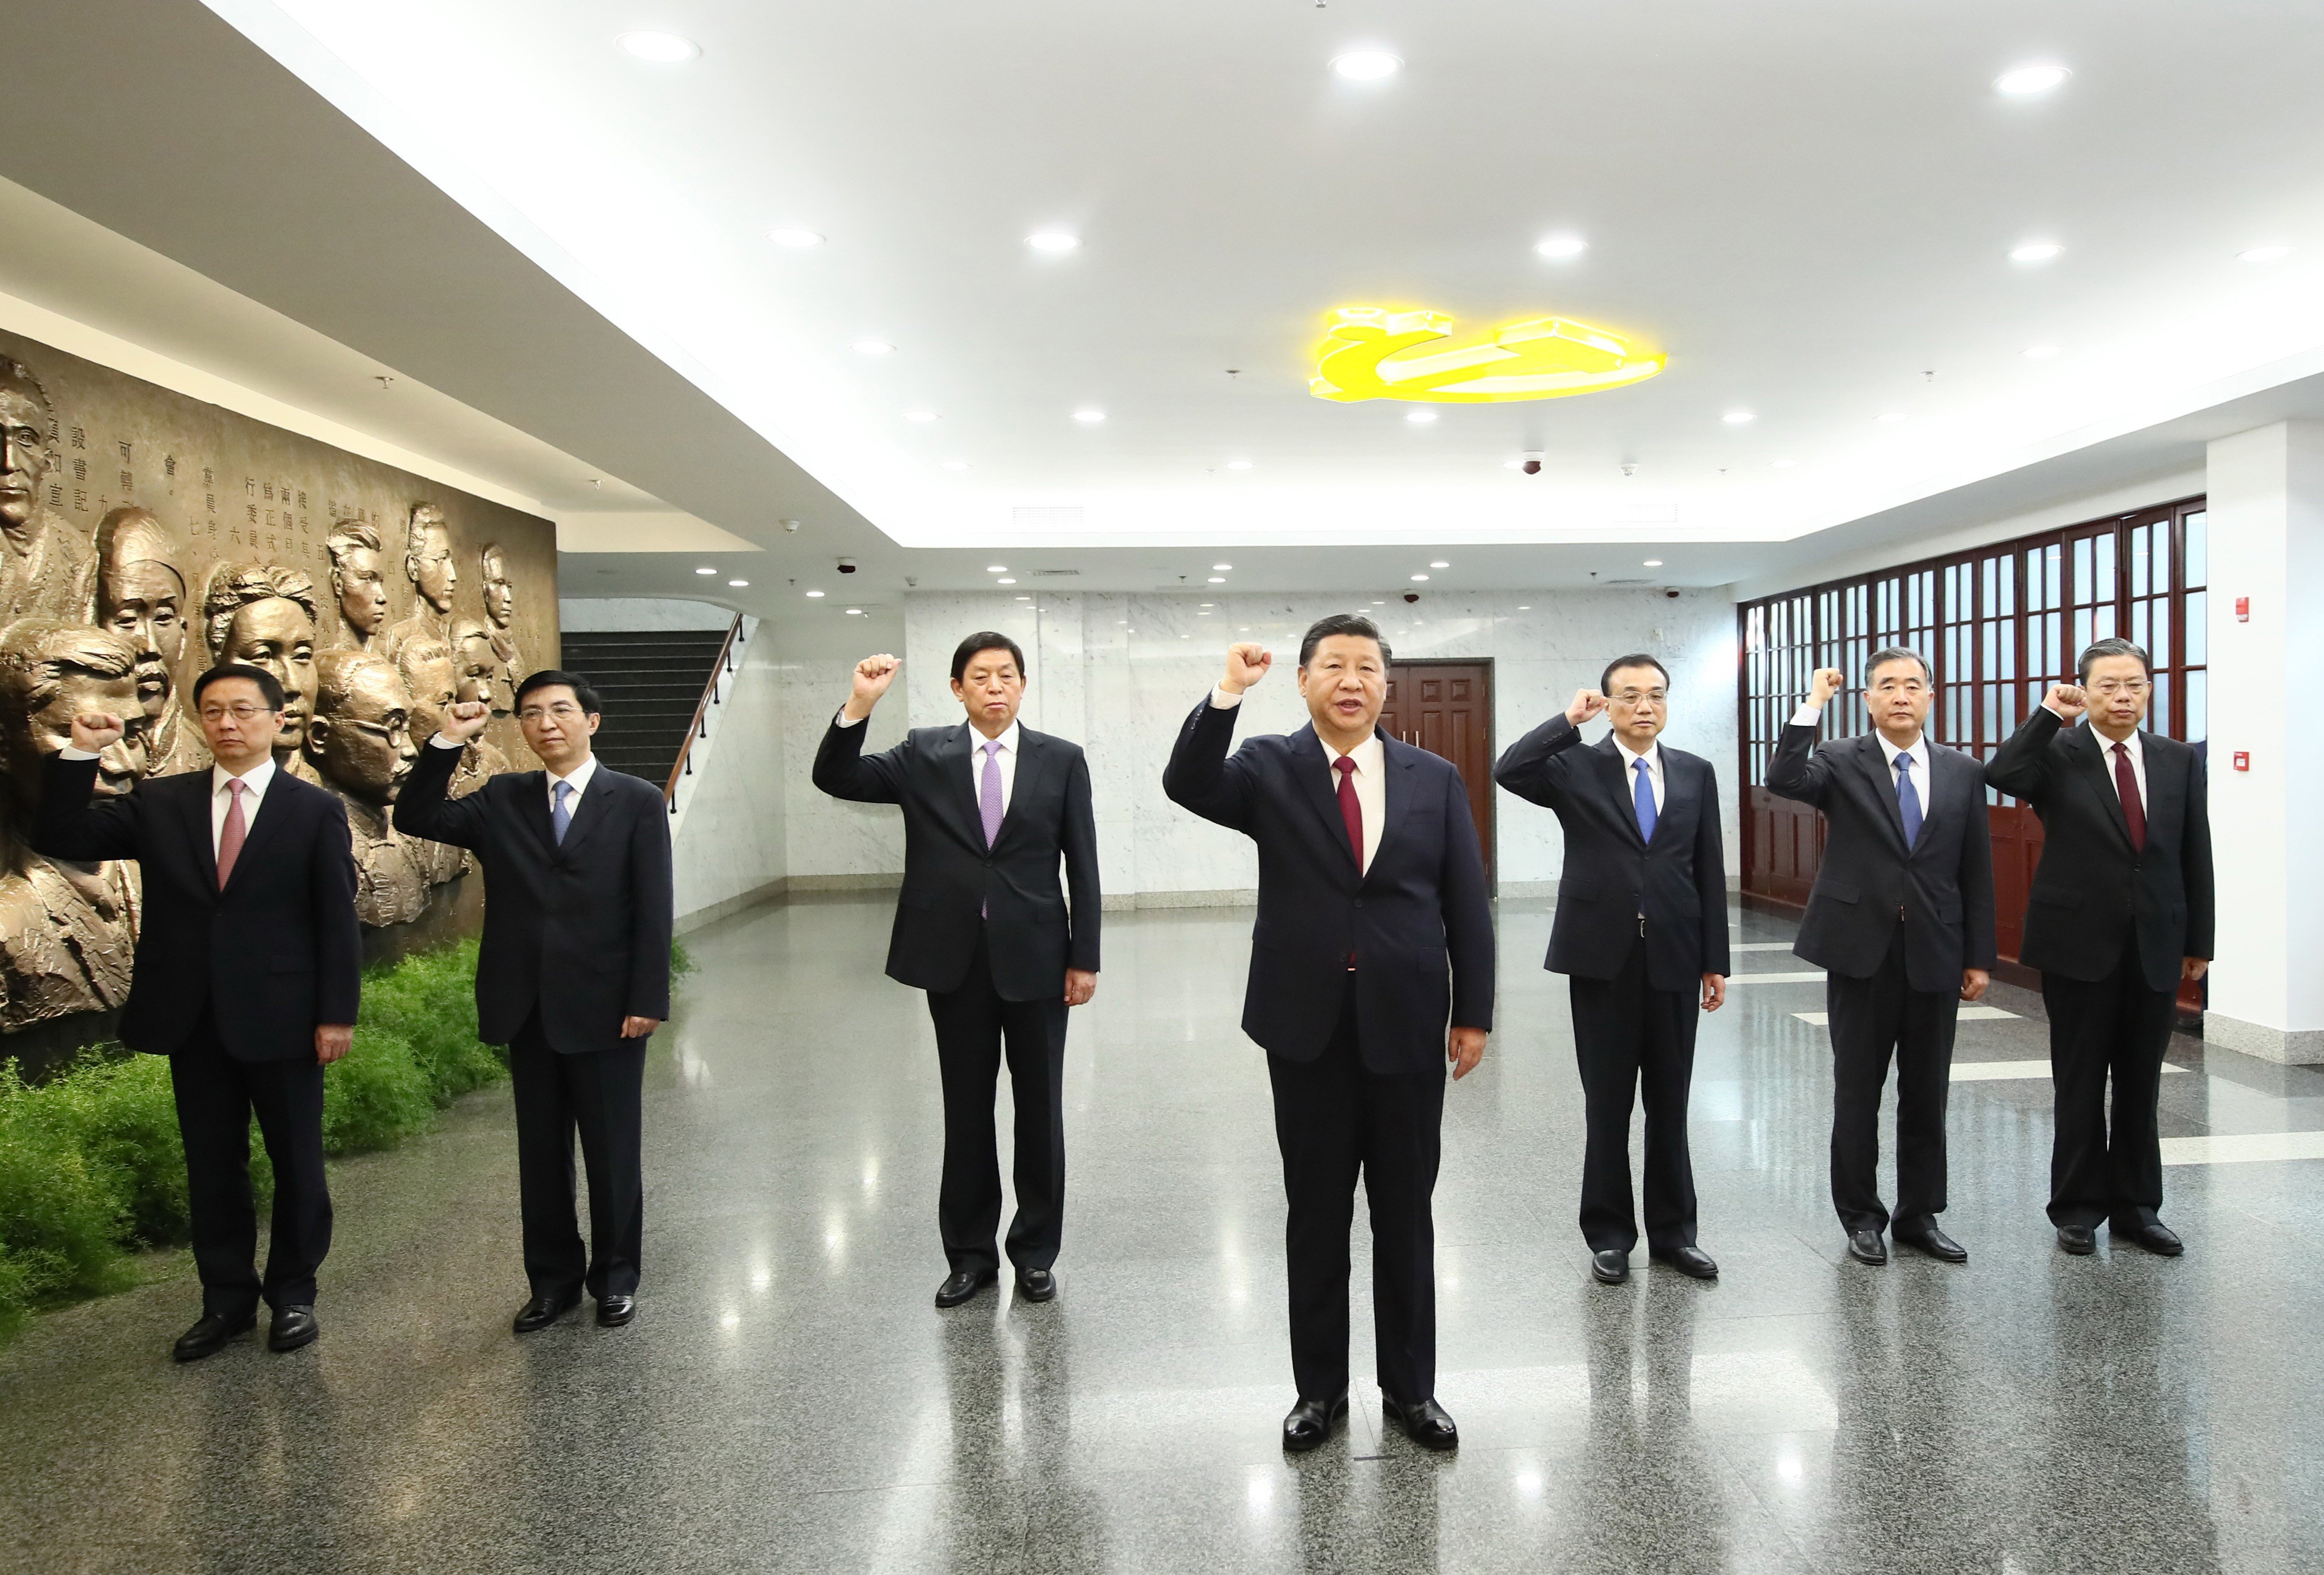 Chinese President Xi Jinping (centre) leads the members of the Standing Committee of the Politburo in an oath-taking ceremony in Shanghai in October. The party chief recently conducted appraisals of all 24 members of the Politburo in what is set to become an annual event. Photo: Xinhua